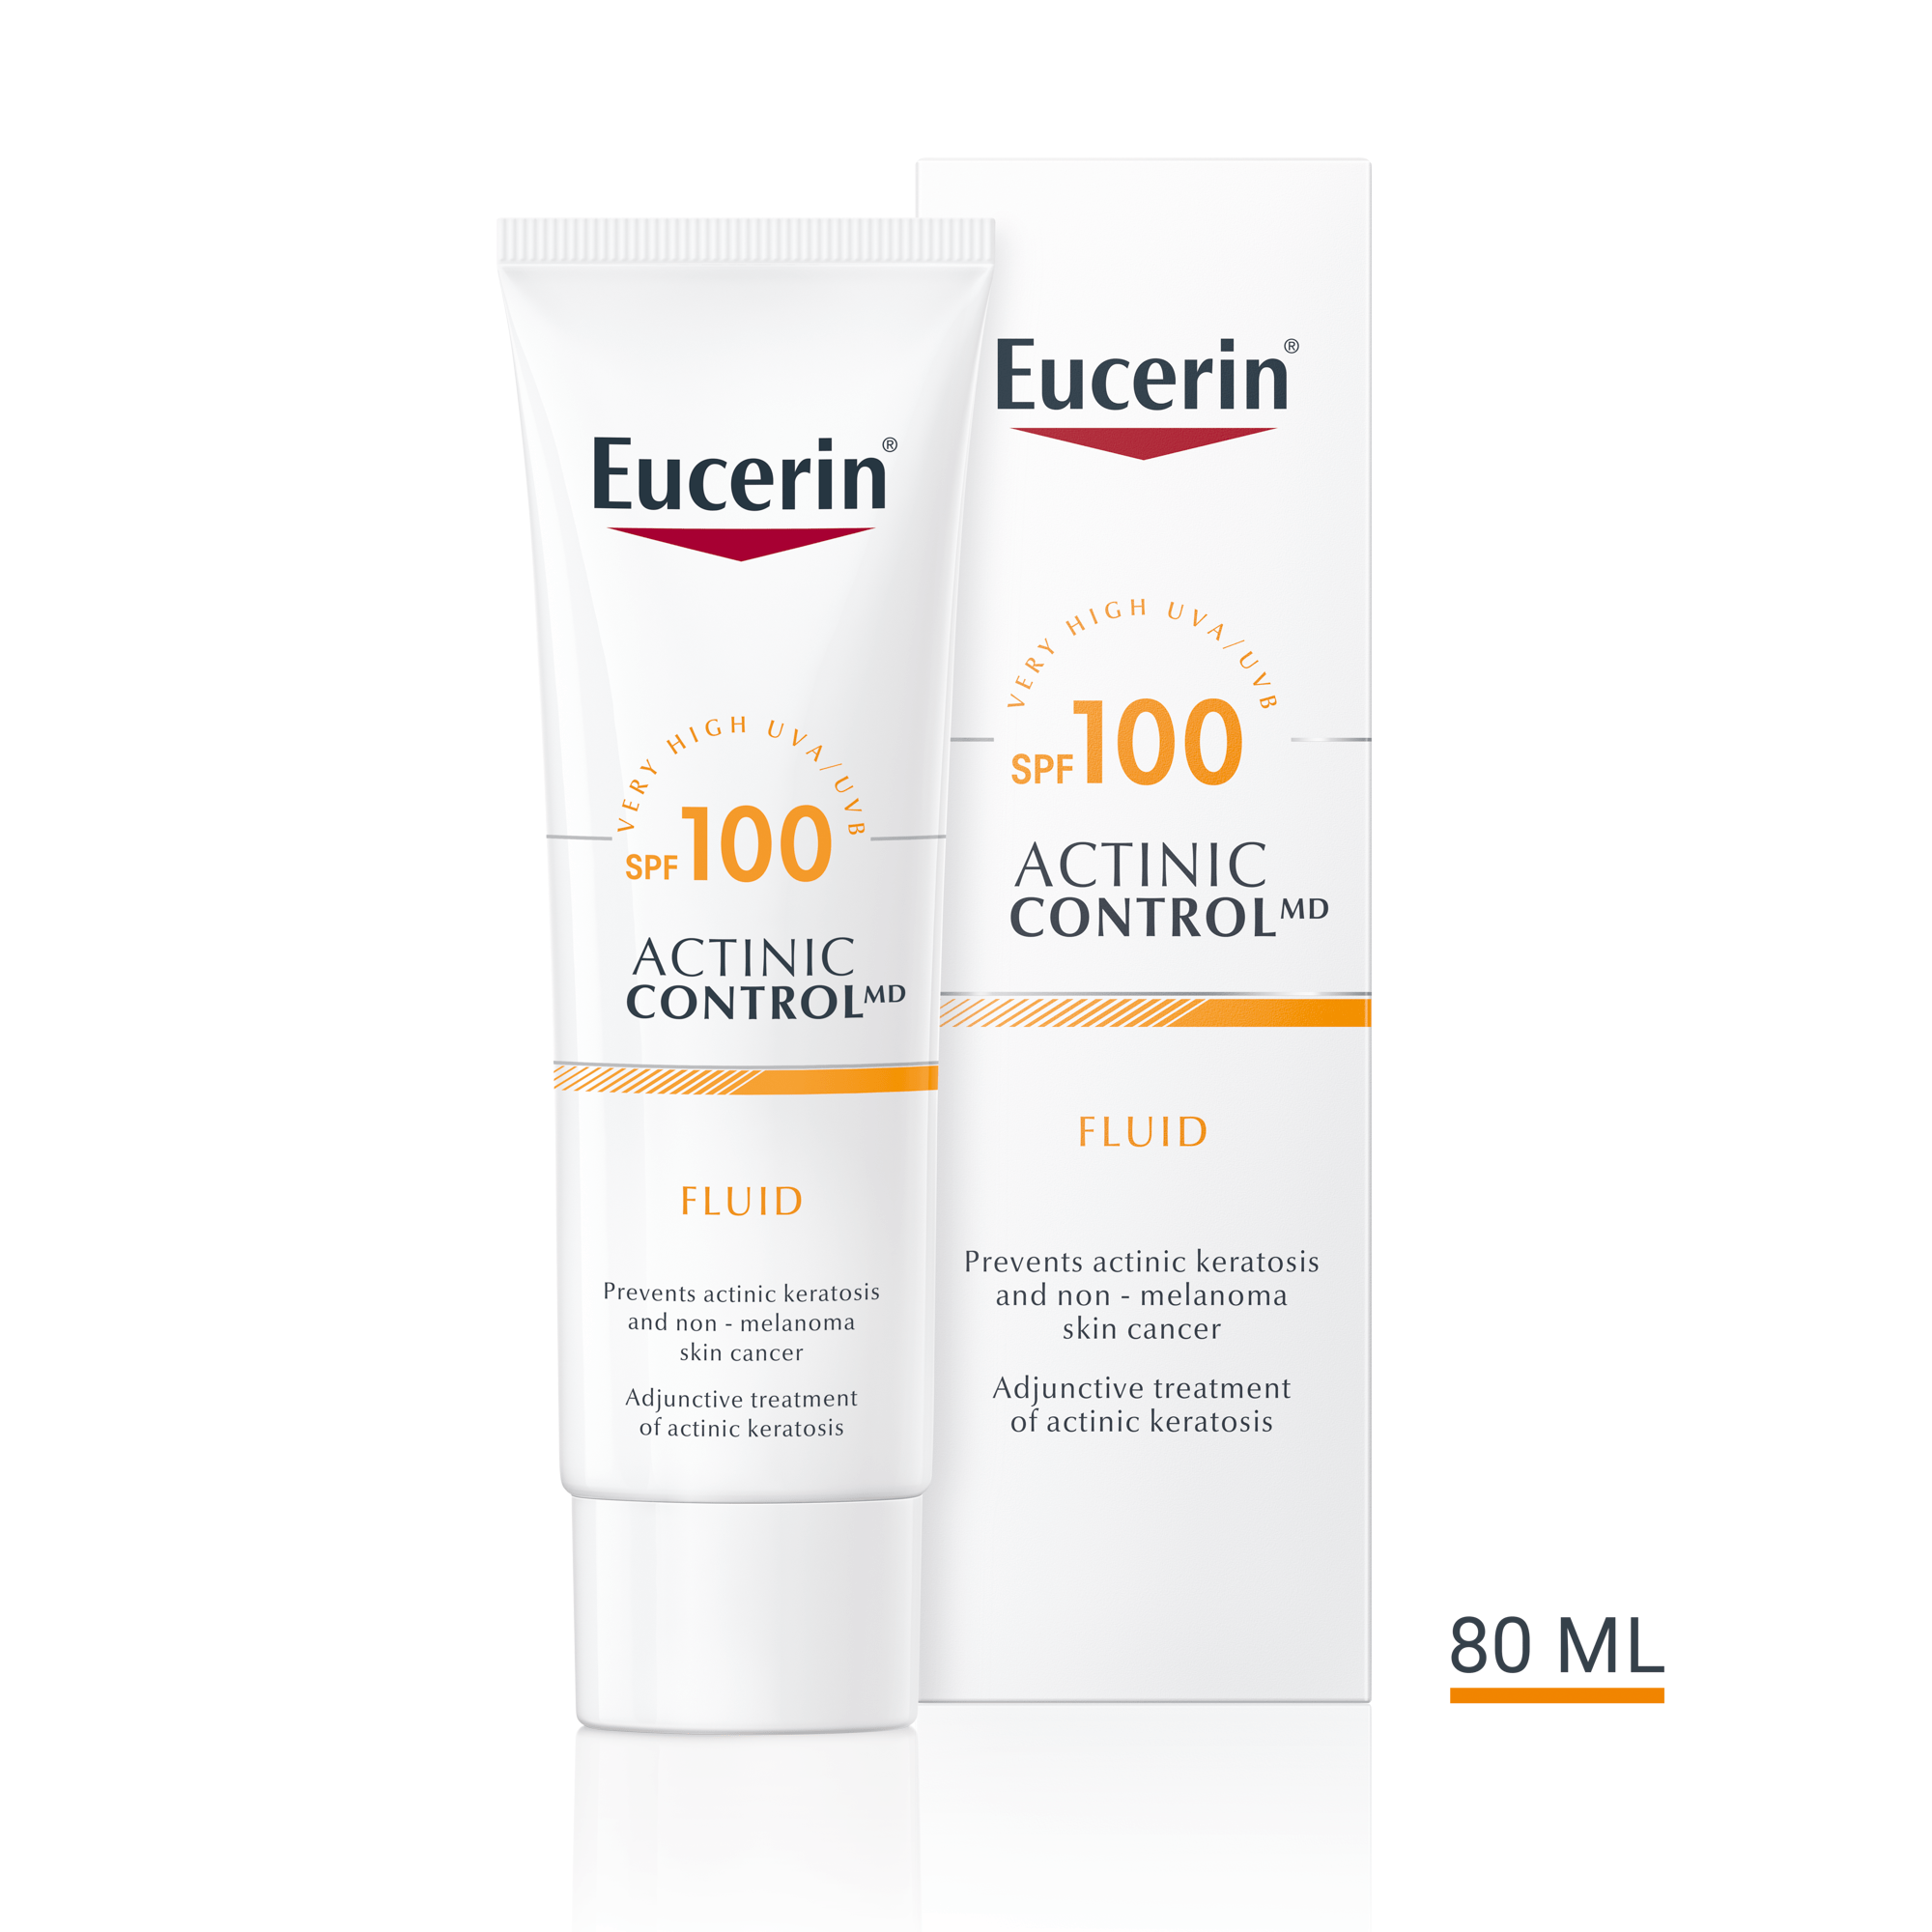 Actinic Control MD SPF 100